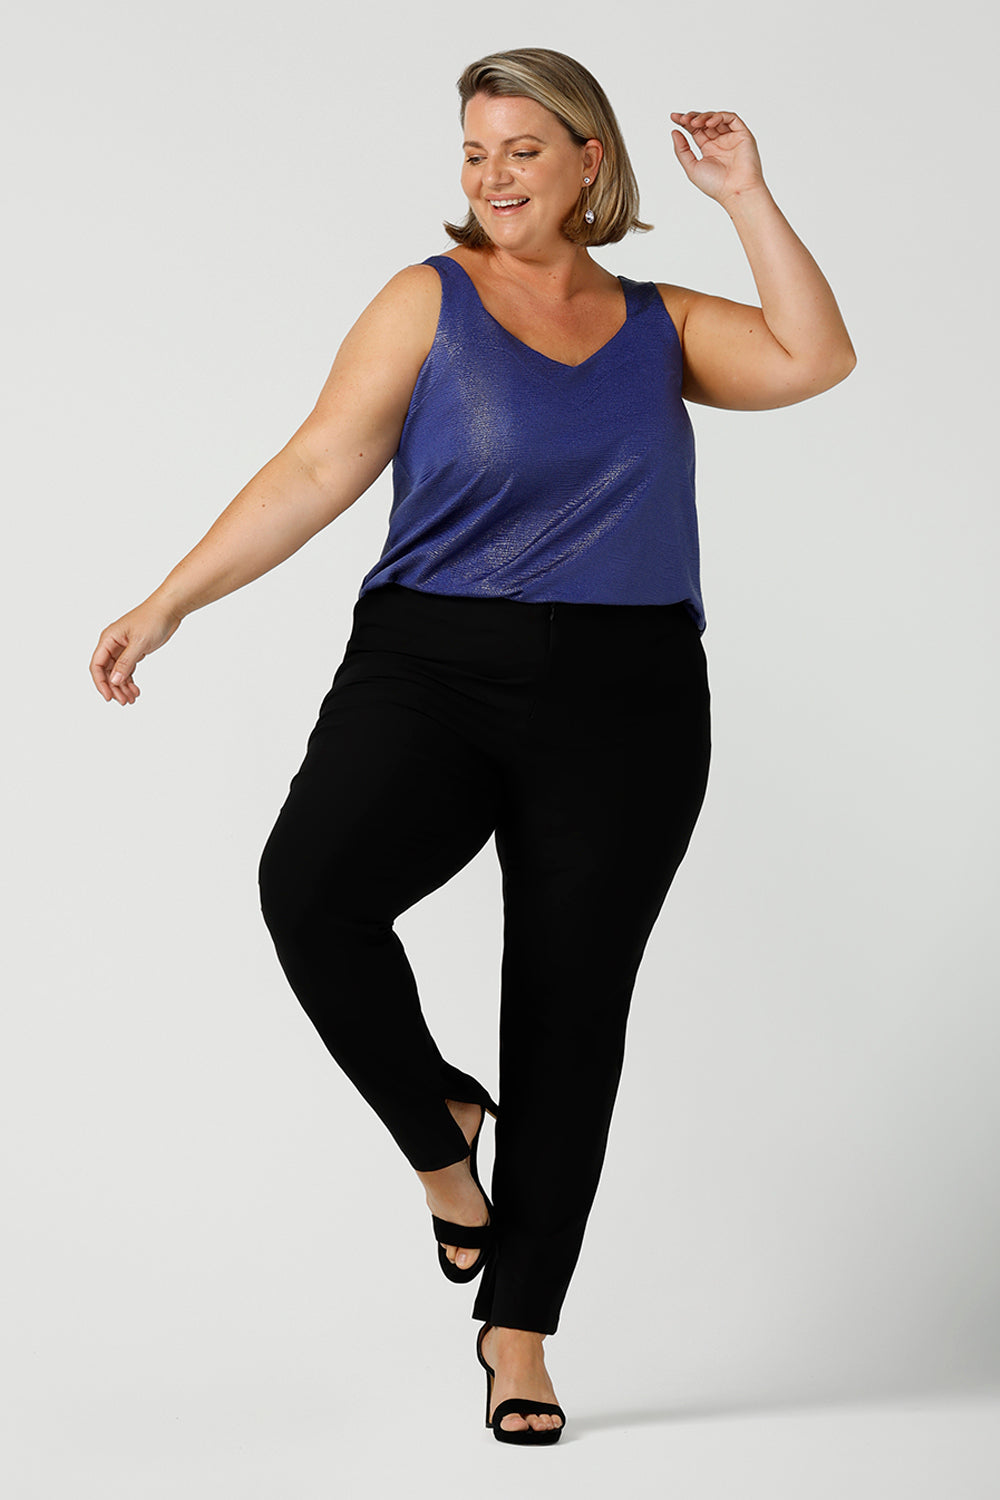 A size 18, fuller figure woman wears a cobalt Xanadu cami top with wide shoulder straps. Made in Australia by Australian and New Zealand women's clothing company. She wears this shimmer jersey top with black pants for a classic evening look. 